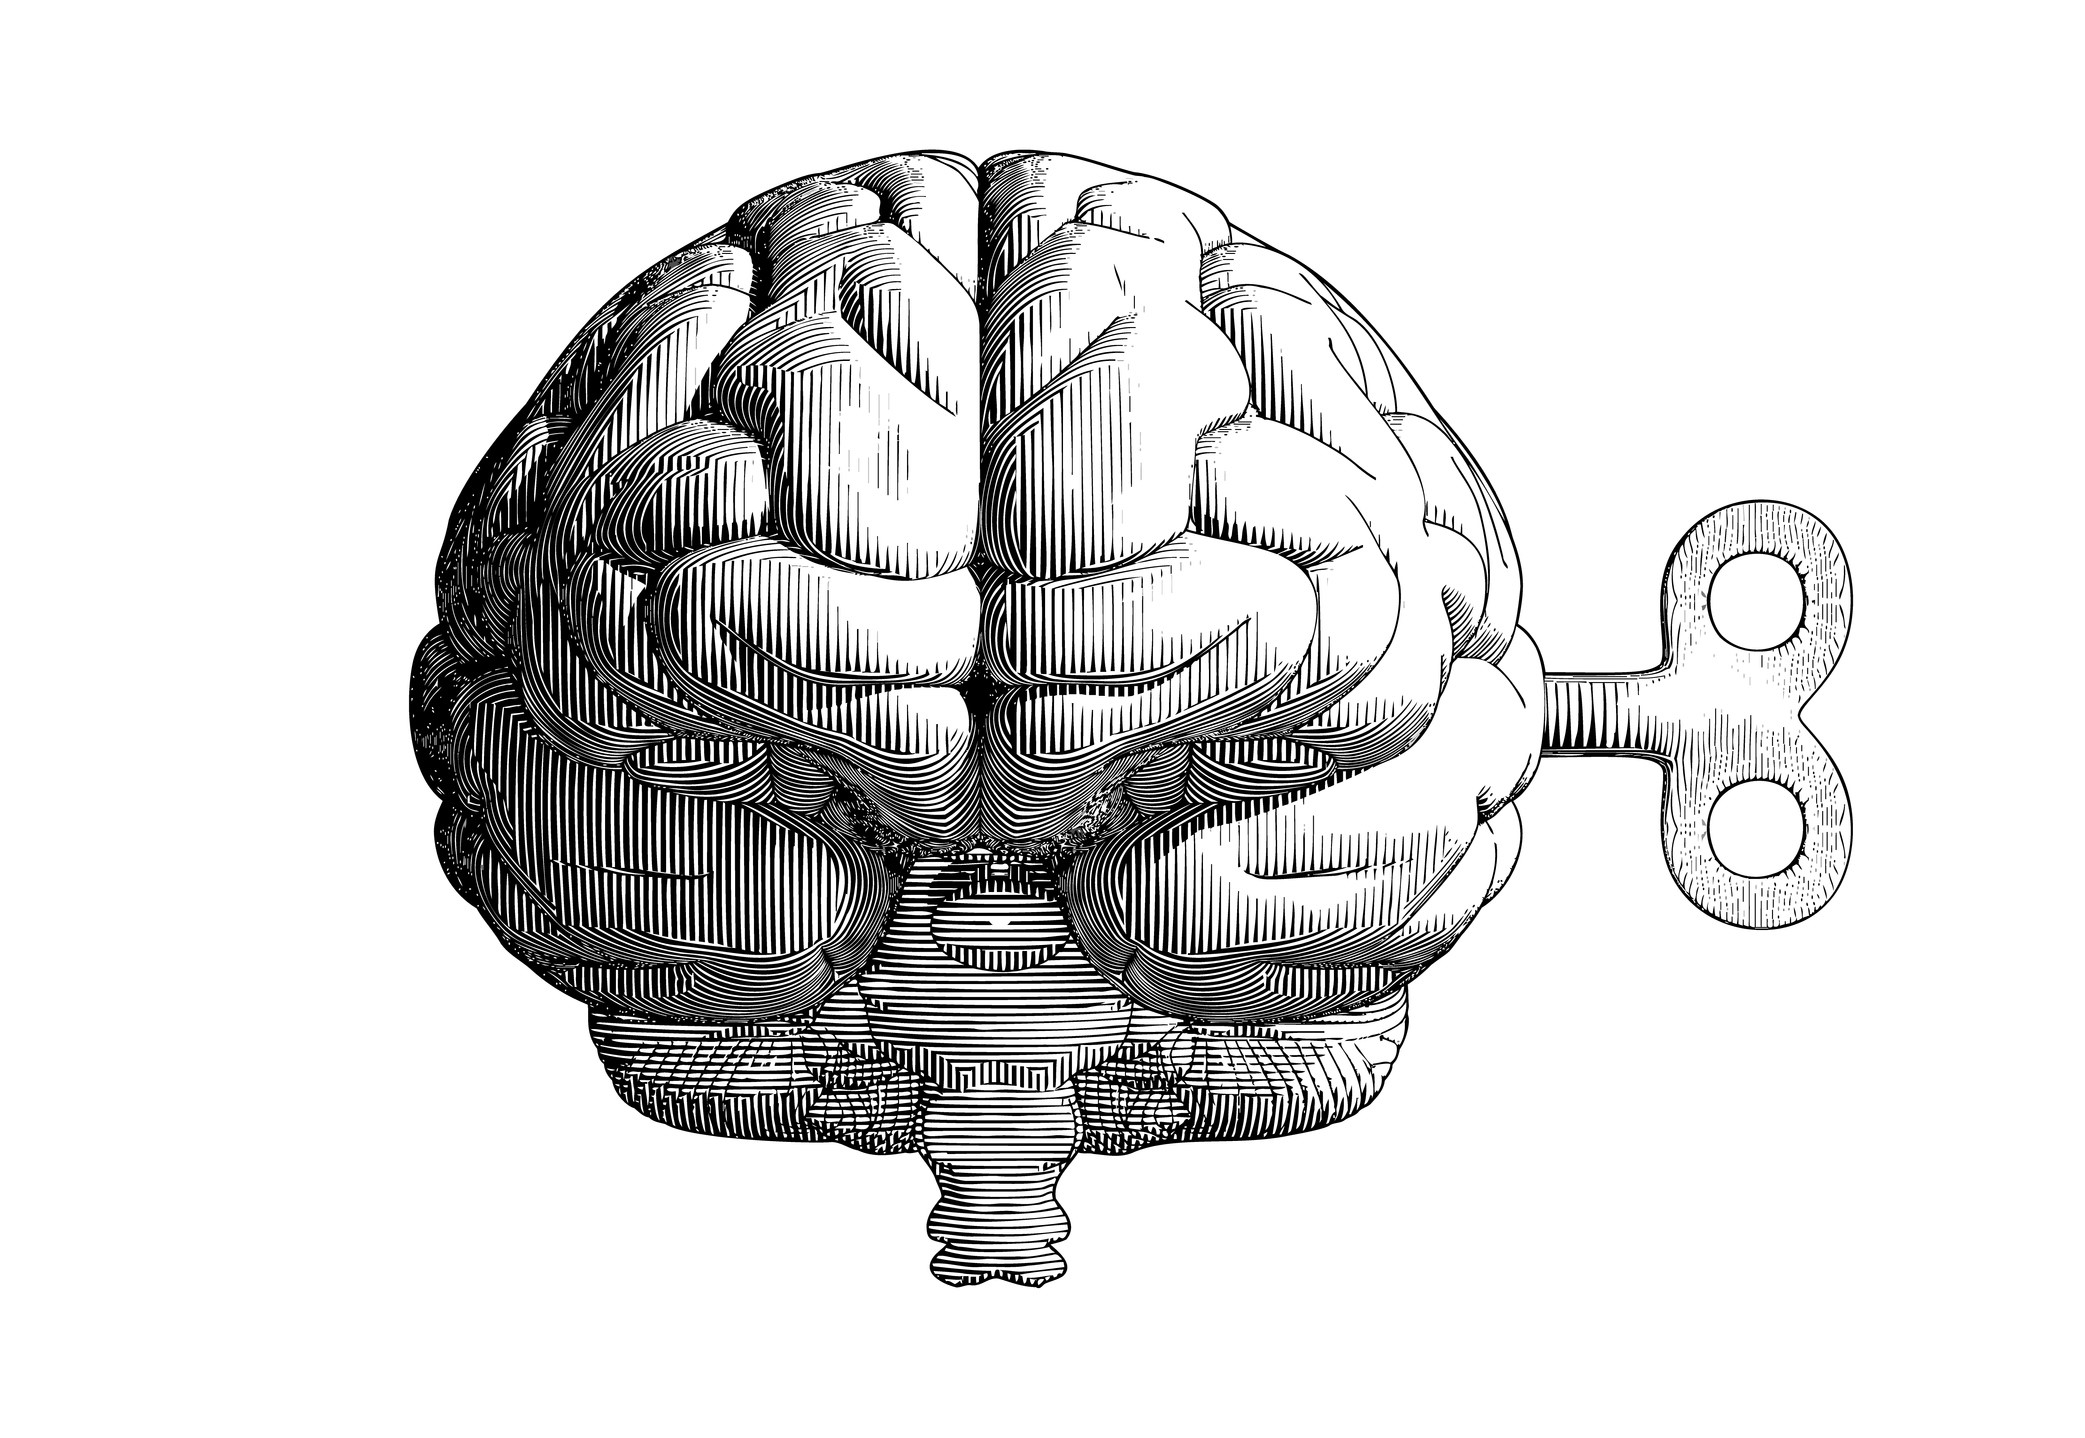 Monochrome vintage engraving drawing human brain with wind up key in front camera view illustration isolated on white background